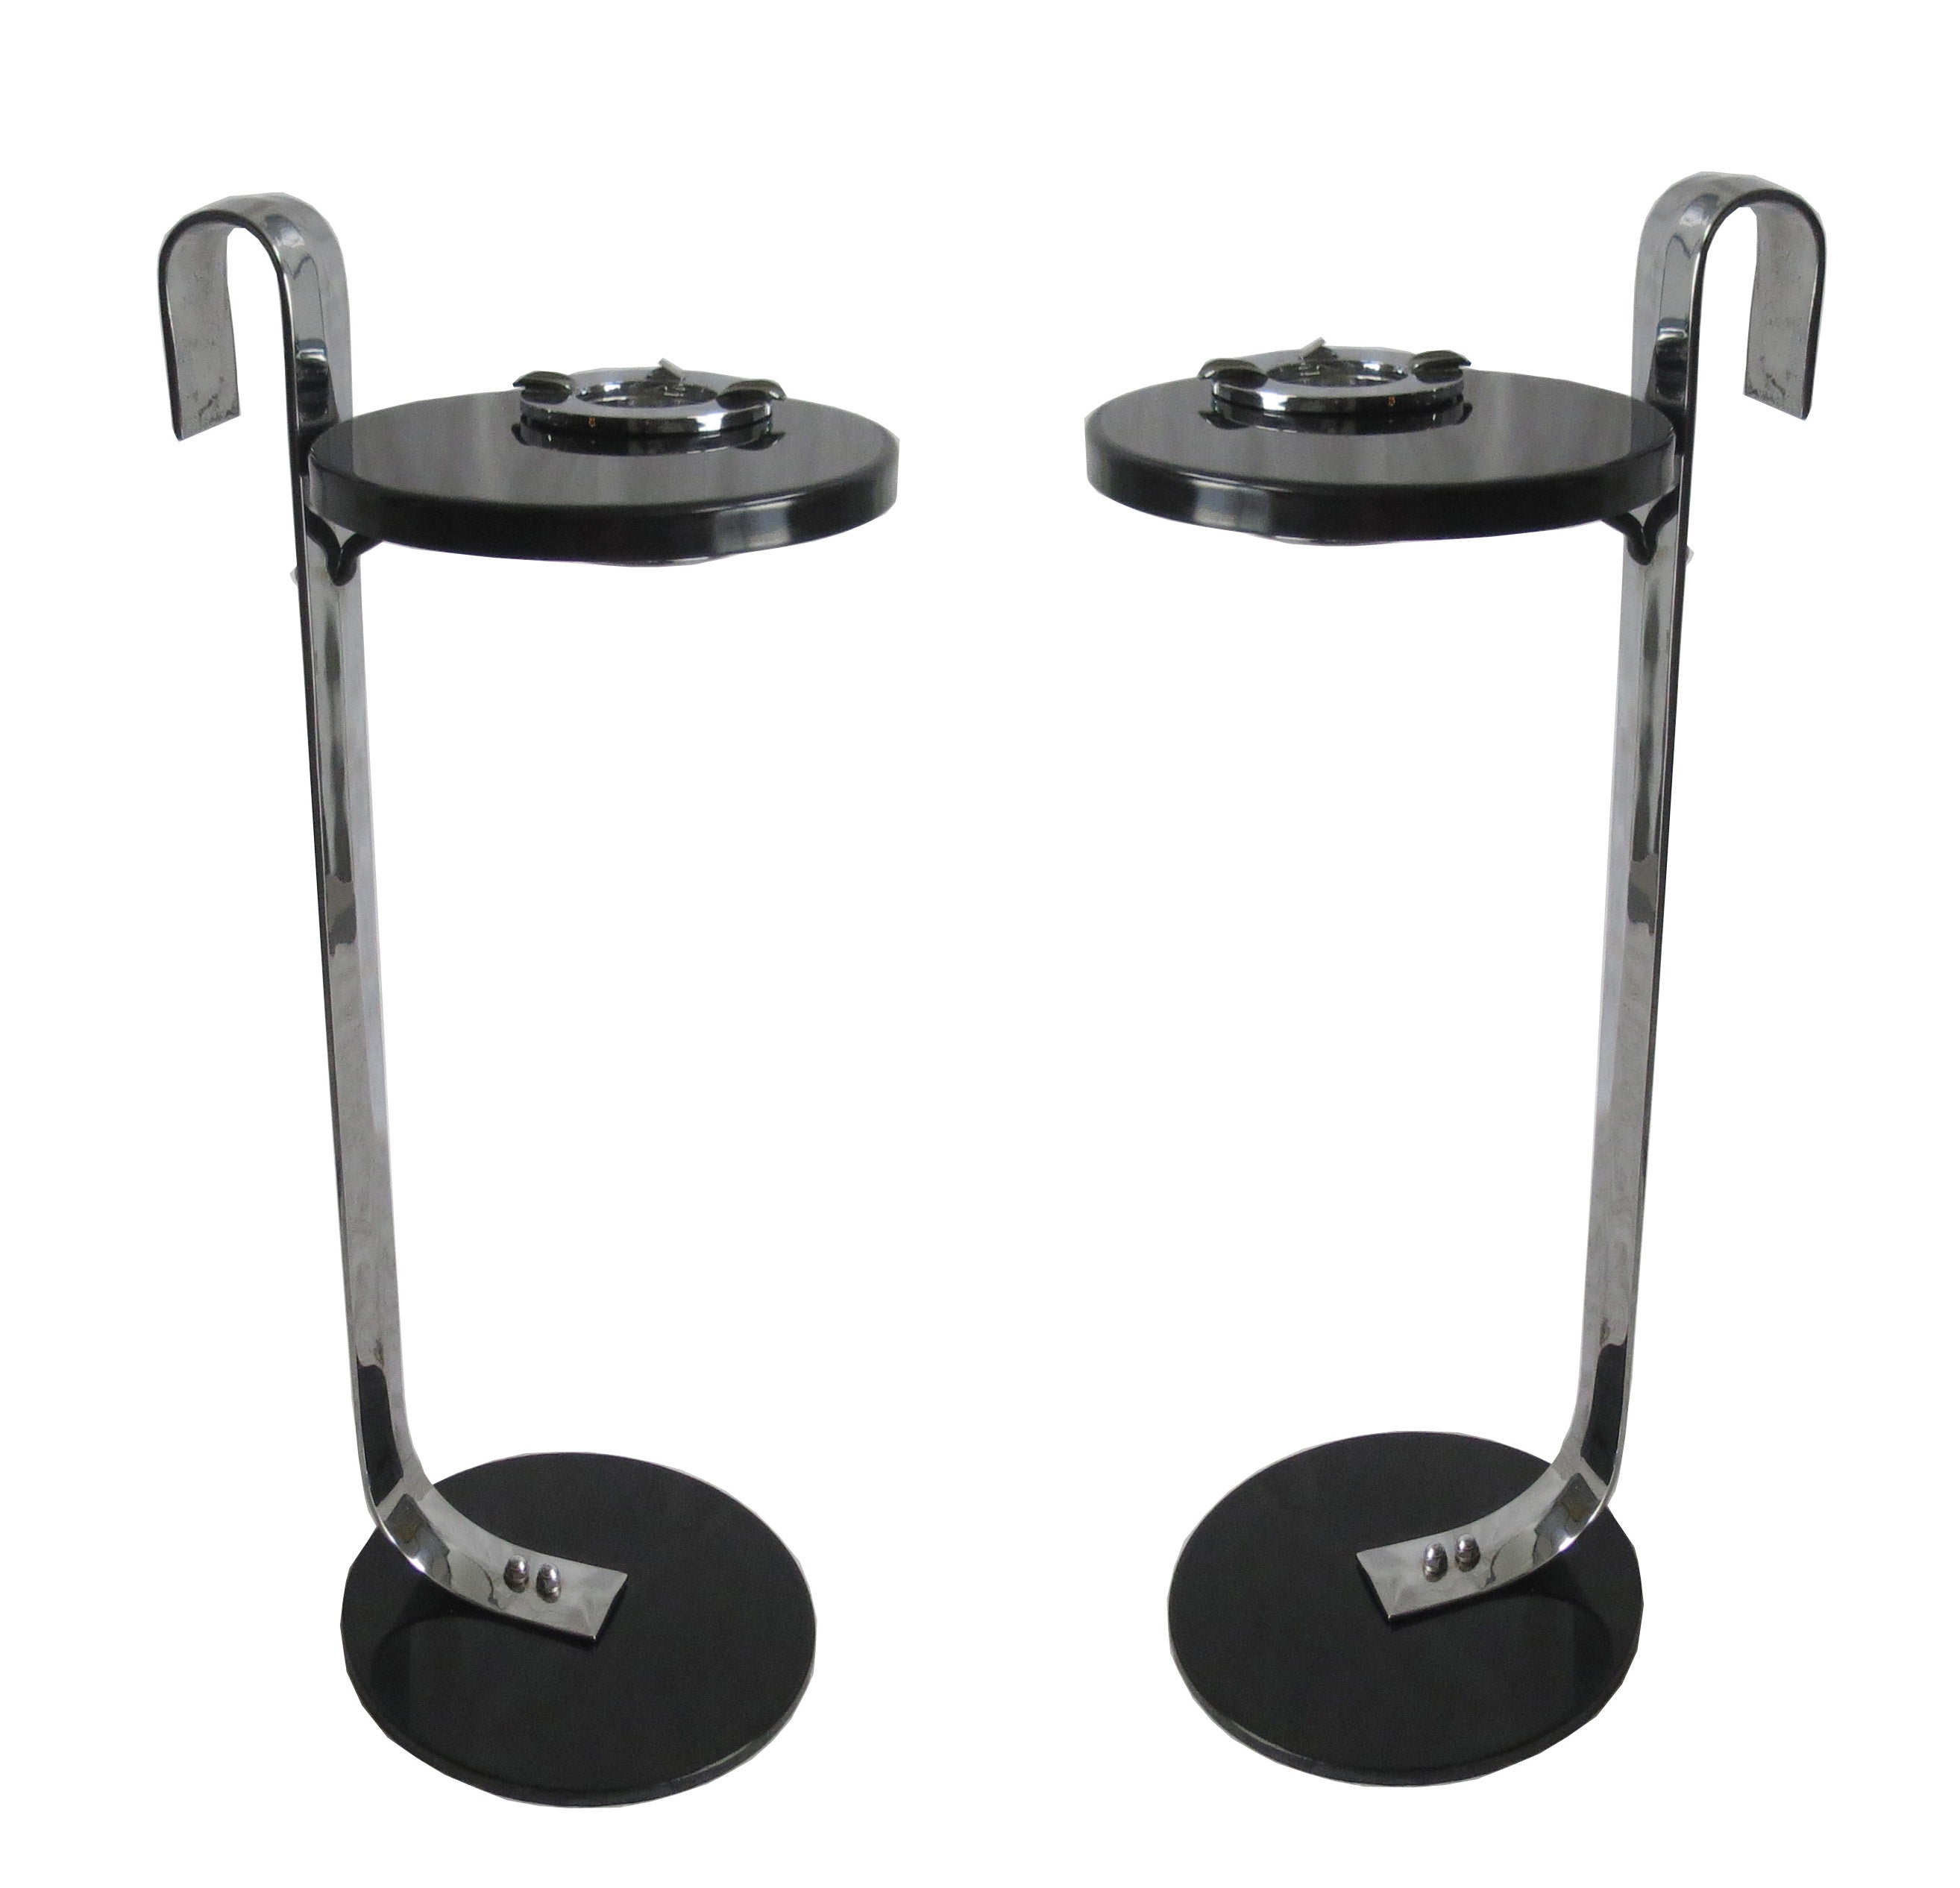 Pair of American Art Deco Smoke Stands  by Percival Goodman for the McKay Co. For Sale